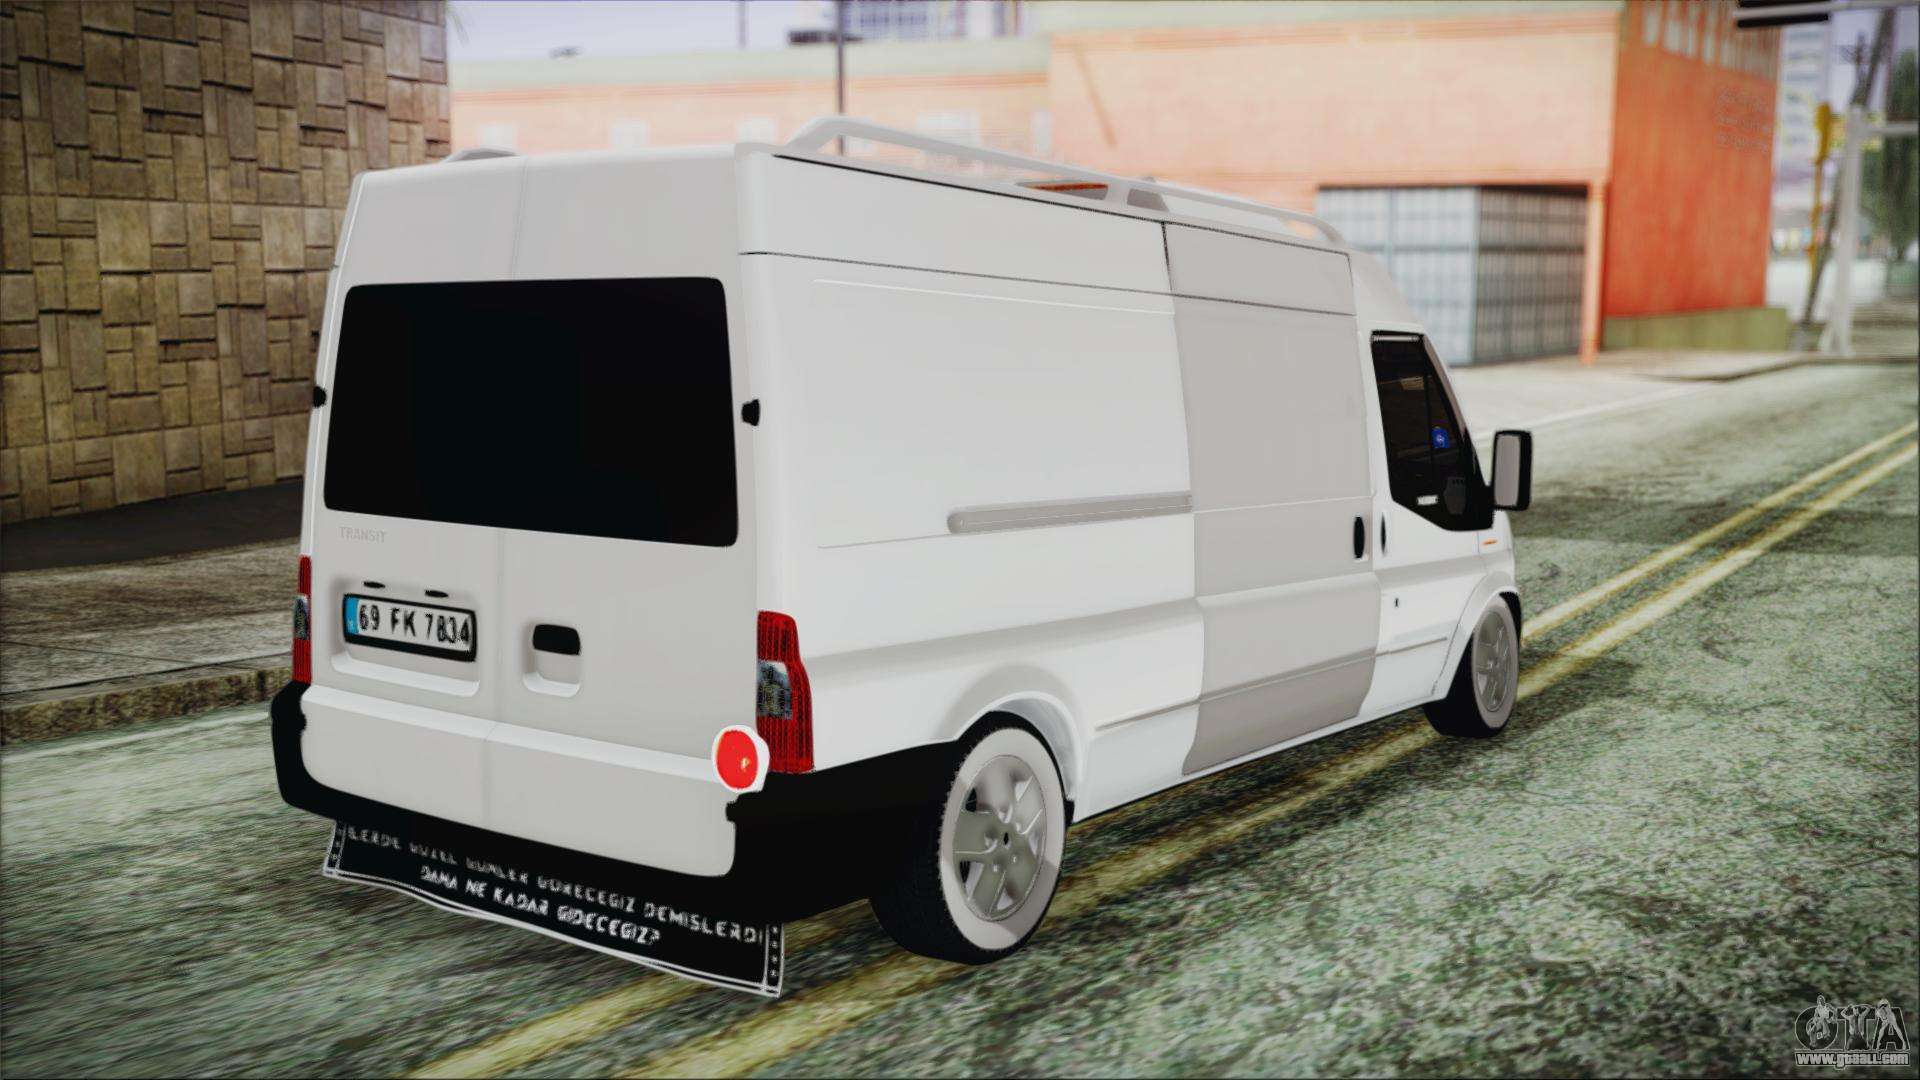 Welcome to the Ford Transit Forum! | Ford Transit Forum